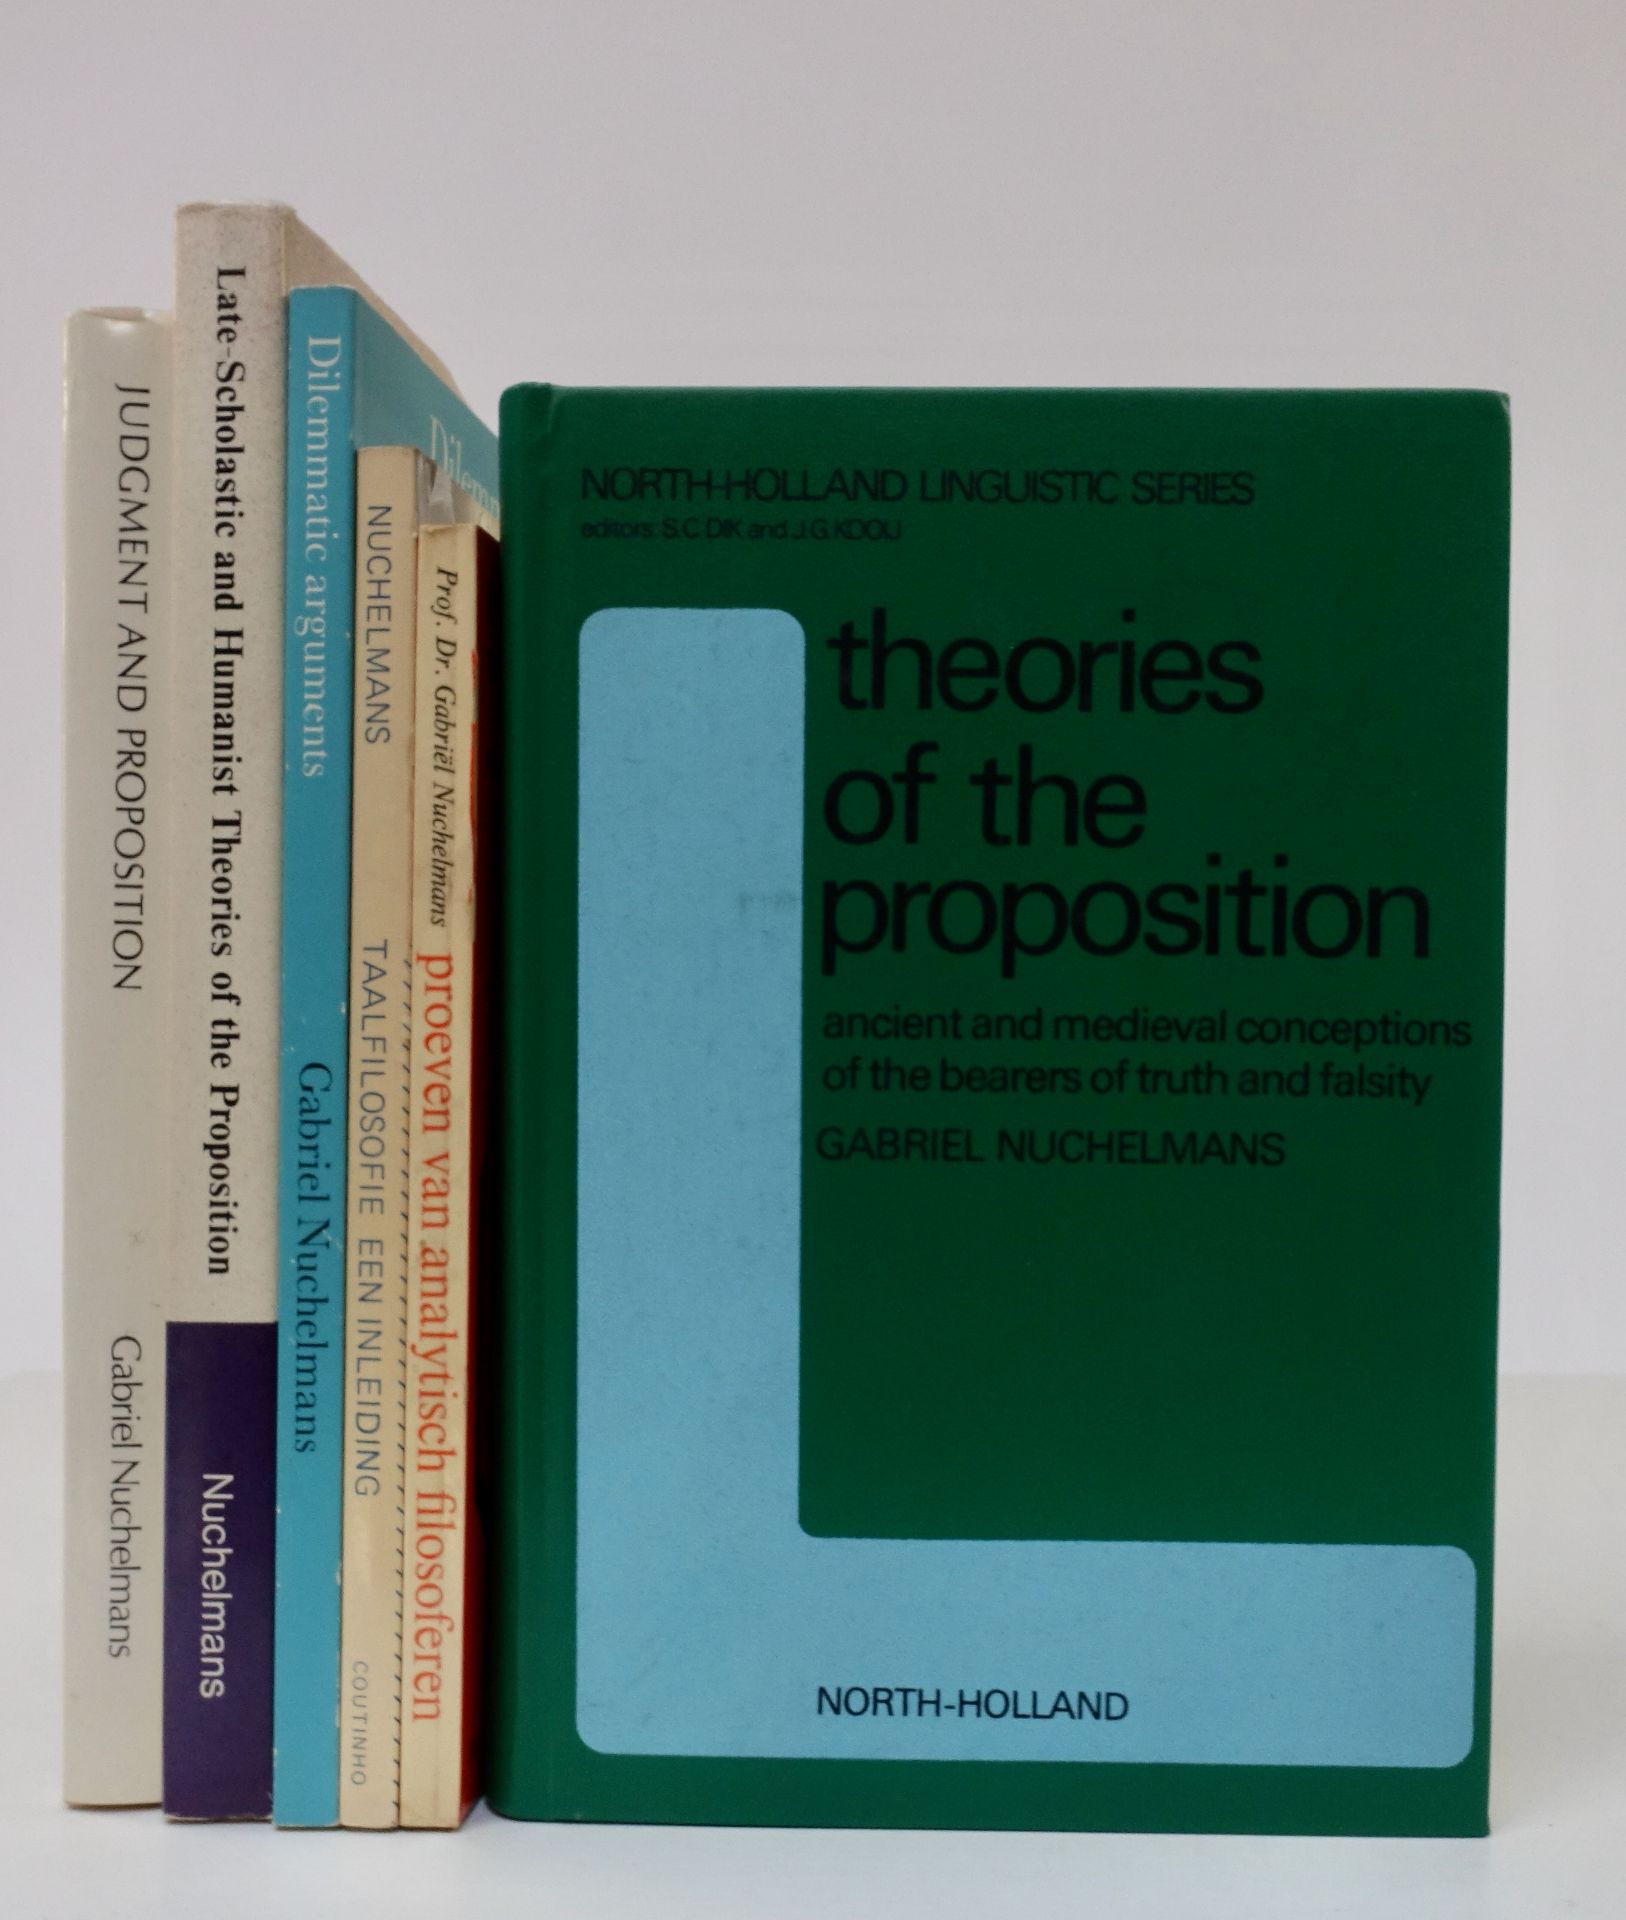 NUCHELMANS, G. Theories of the proposition. Ancient and medieval conceptions of the